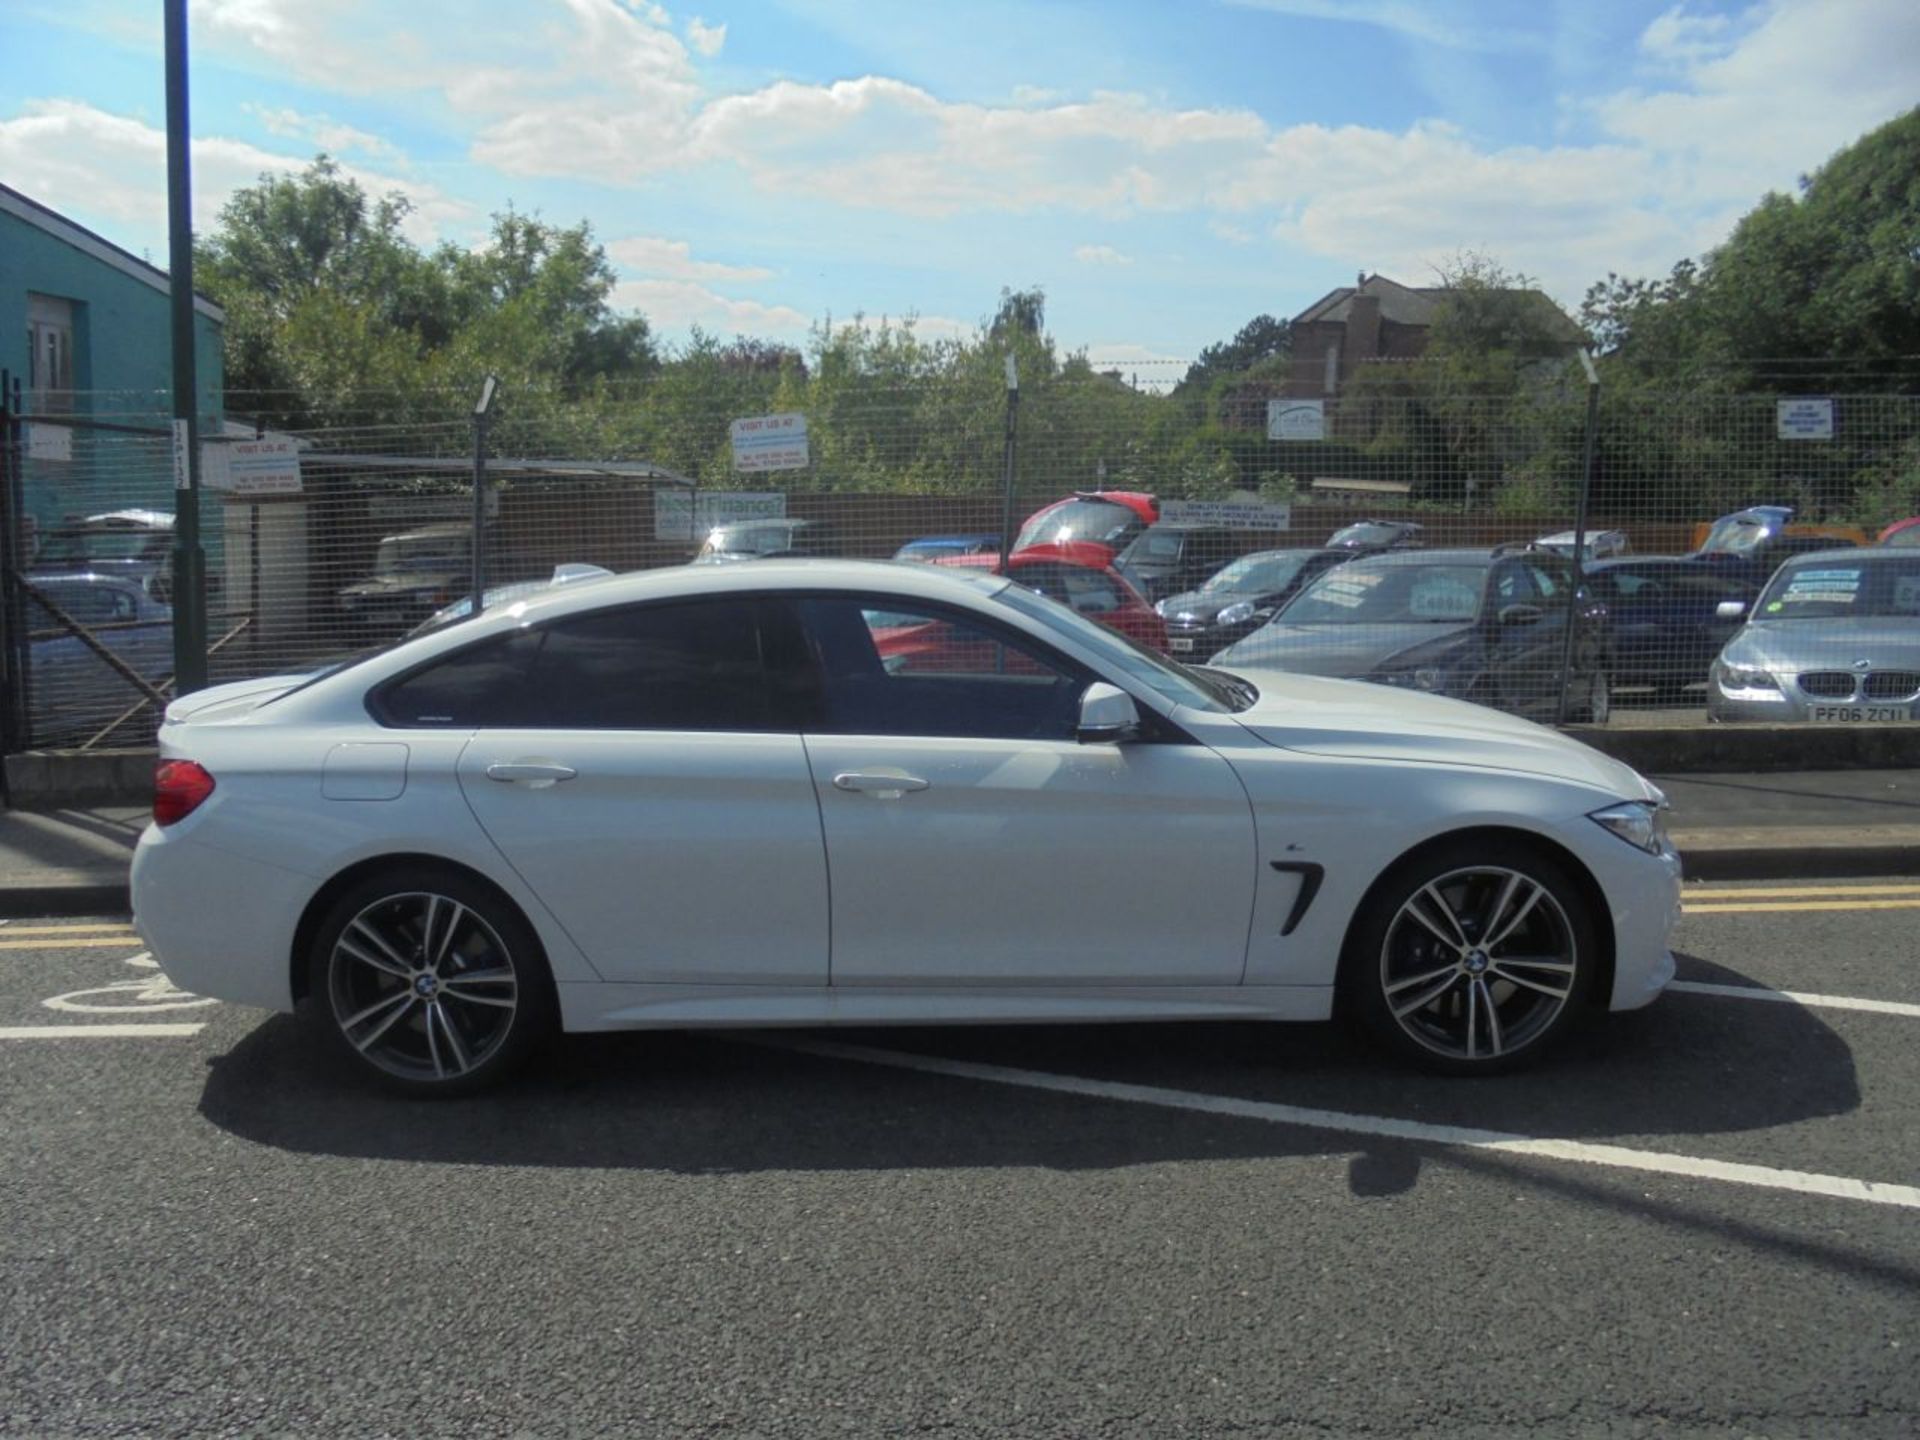 2015 (65 REG), BMW 4 SERIES GRAN COUPE 3.0 435I M SPORT GRAN COUPE AUTO 5DR COUPE, 1,200 MILES ONLY - Image 4 of 11